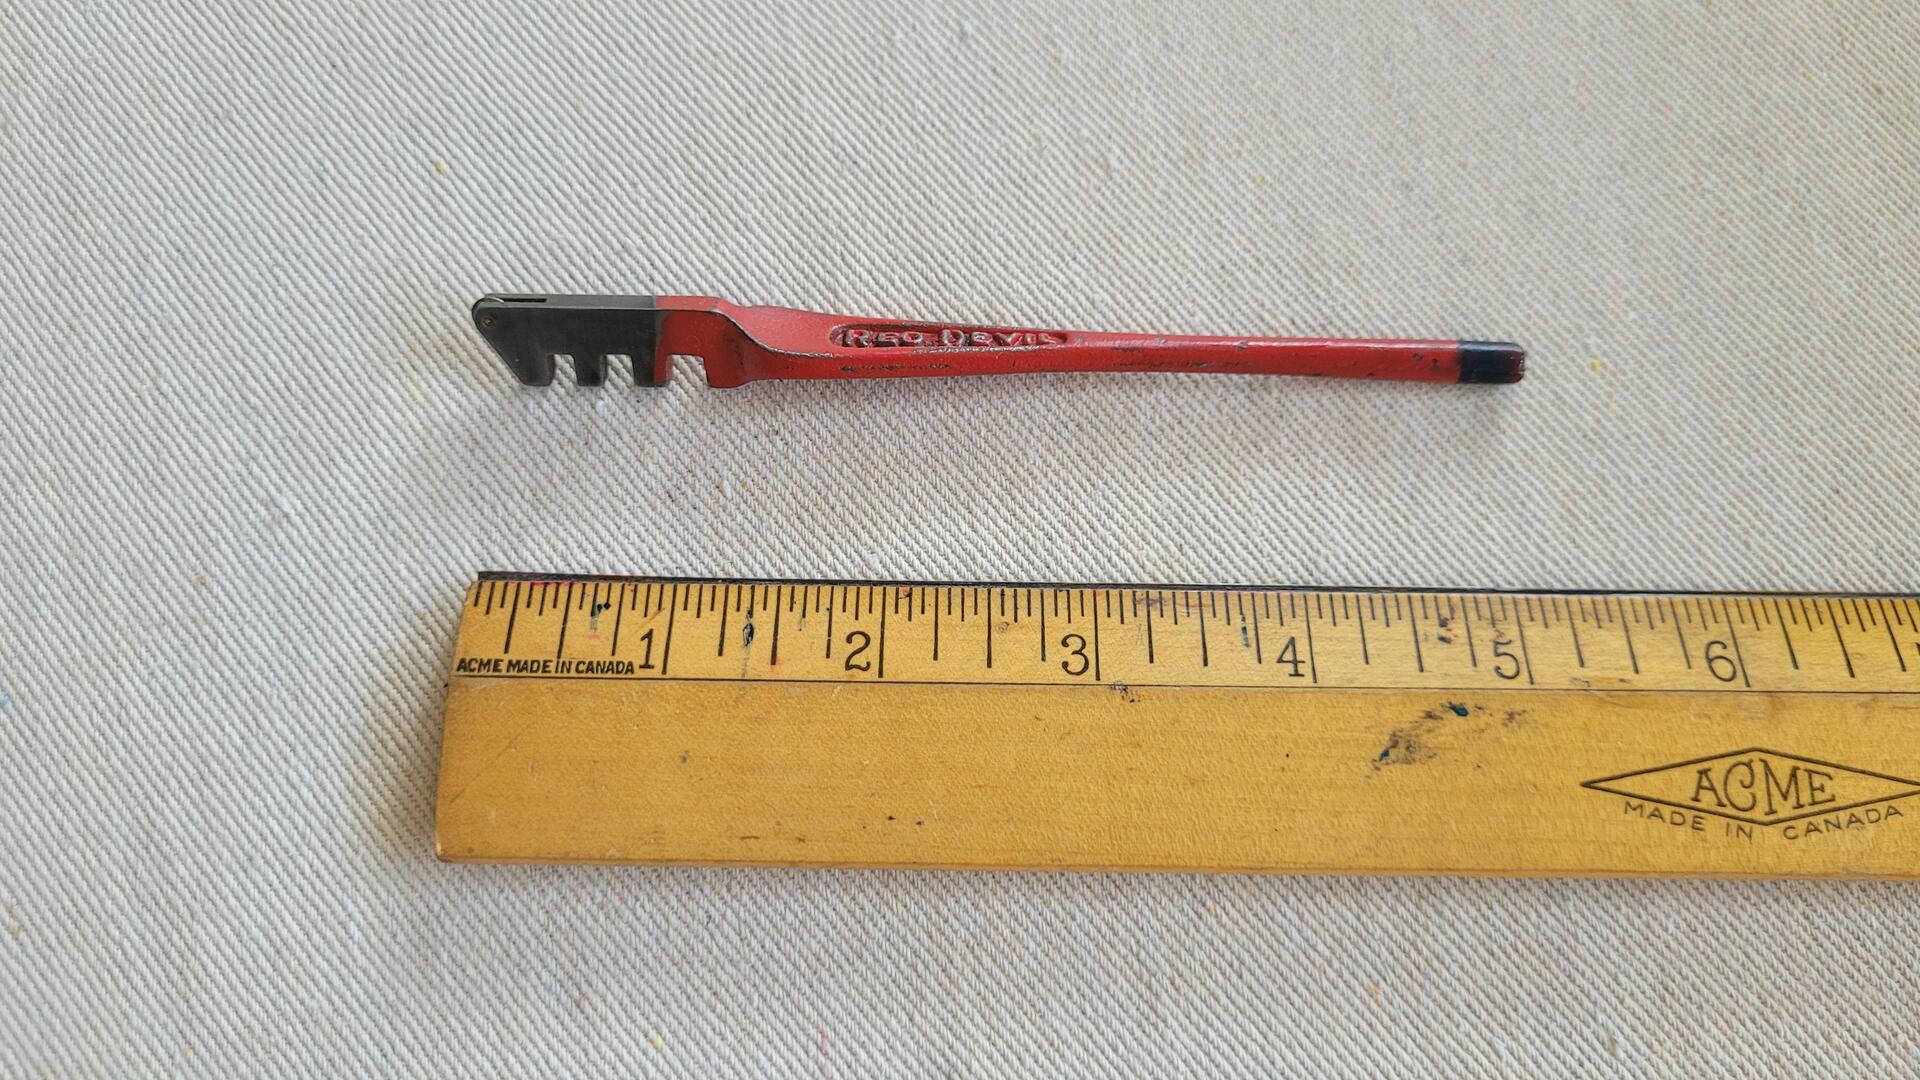 Vintage Red Devil glass cutter steel 5 inches long. Antique made in USA collectible glazier tools